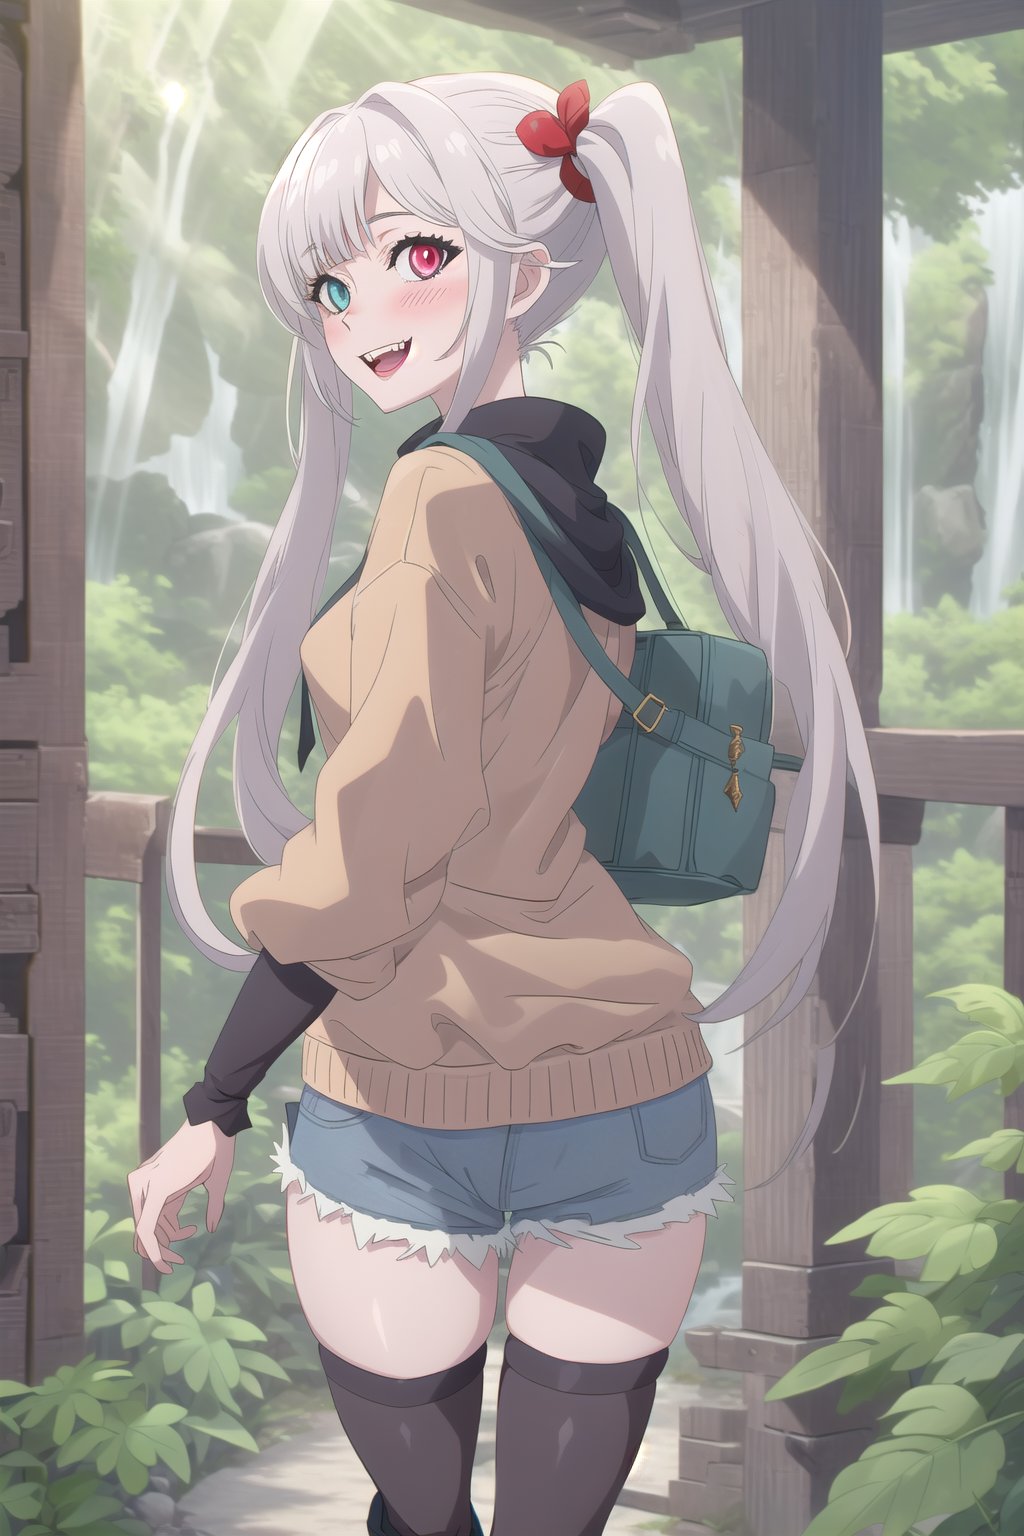 nier anime style illustration, best quality, masterpiece High resolution, good detail, bright colors, HDR, 4K. Dolby vision high.

Albino deer girl with long straight hair, long pigtails, blushing. Heterochromia (One blue eye, one red eye). 

Gray steampunk sweatshirt 

Medieval fantasy style denim shorts 

black stockings 

Gray ankle boots 

Forest with leafy trees

waterfalls 

Intense sun rays between the trees 
 
Flirty smile (yandere smile). Happy, excited.  Open mouth 

Showing fangs, exposed fangs

selfie pose

deer girl

Girl from behind